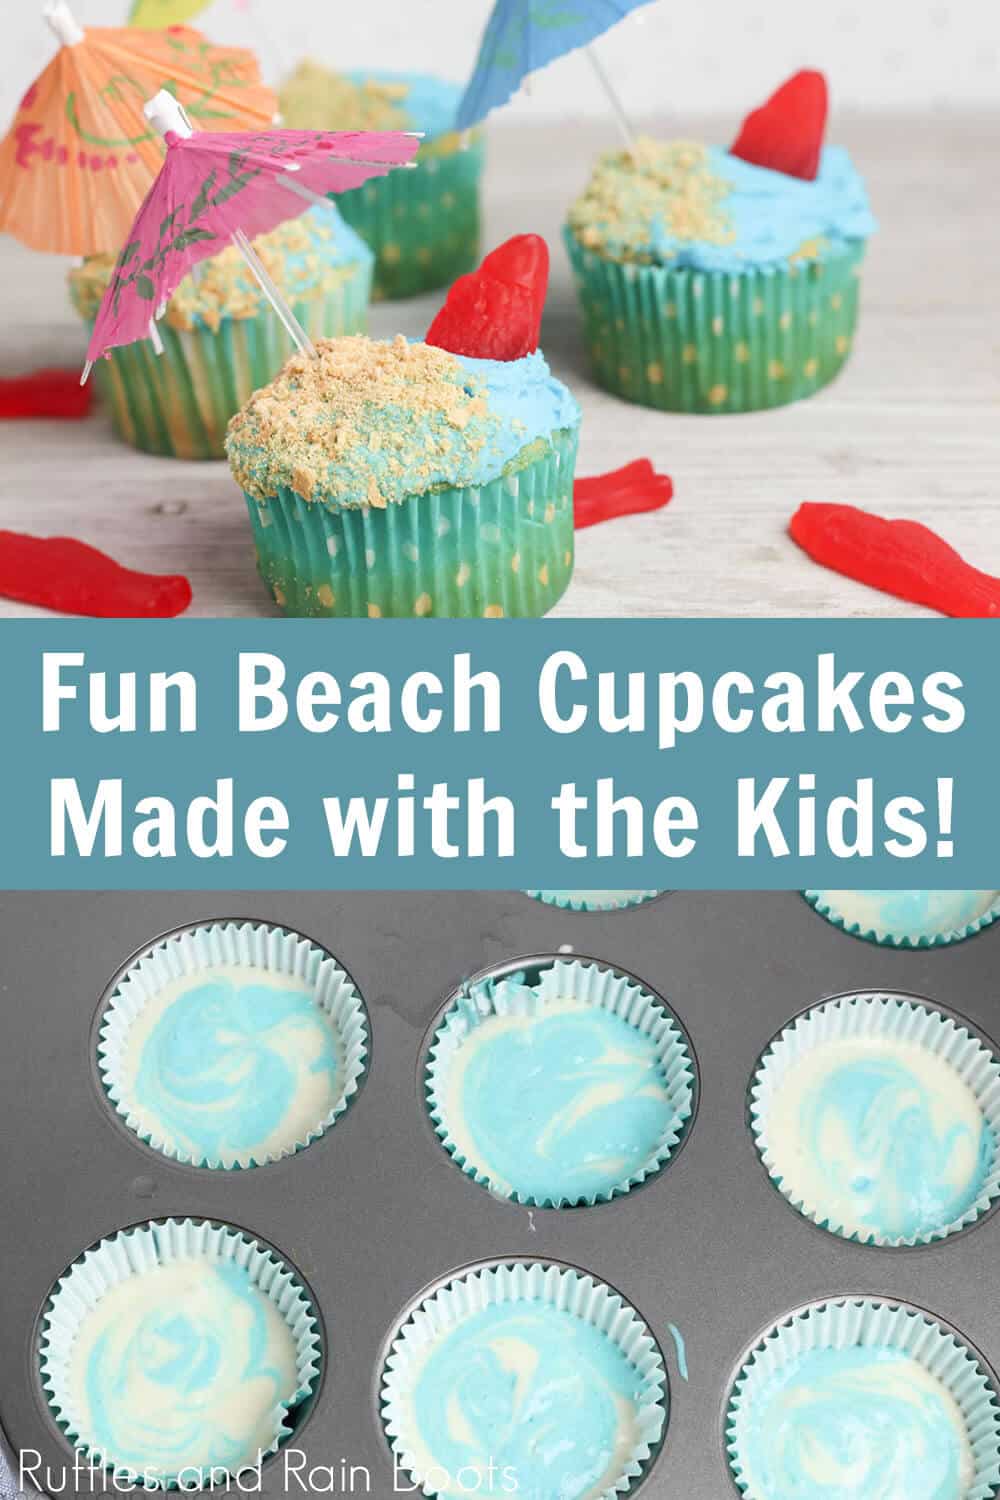 photo collage of fun beach cupcakes and swirled batter recipe with text which reads fun beach cupcakes made with the kids!